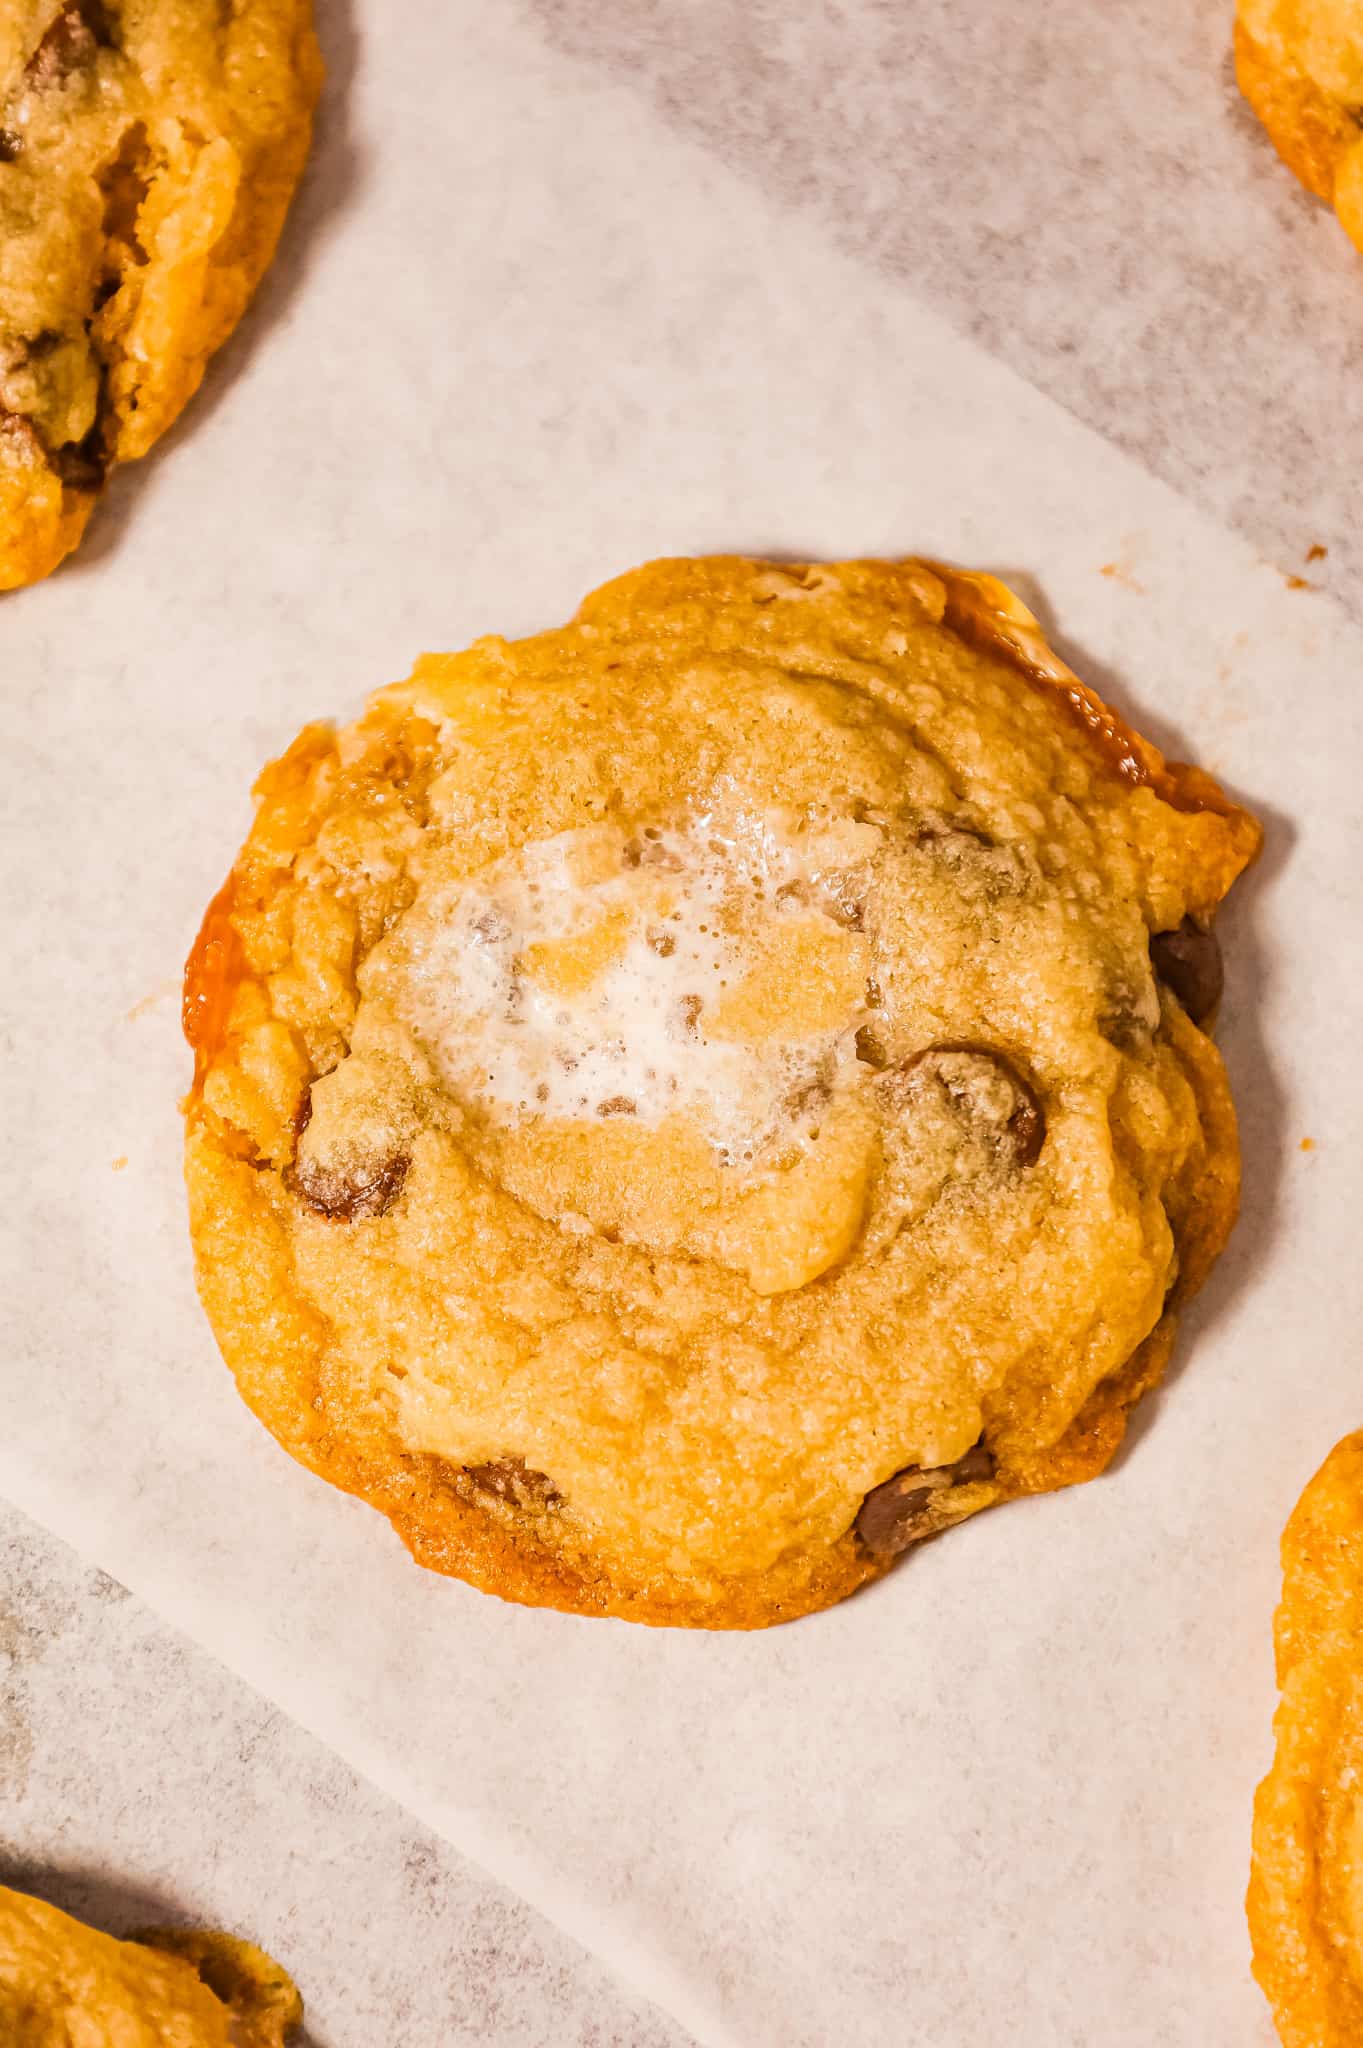 Chocolate Chip Marshmallow Cookies are delicious chewy cookies loaded with semi sweet chocolate chips and gooey mini marshmallows.